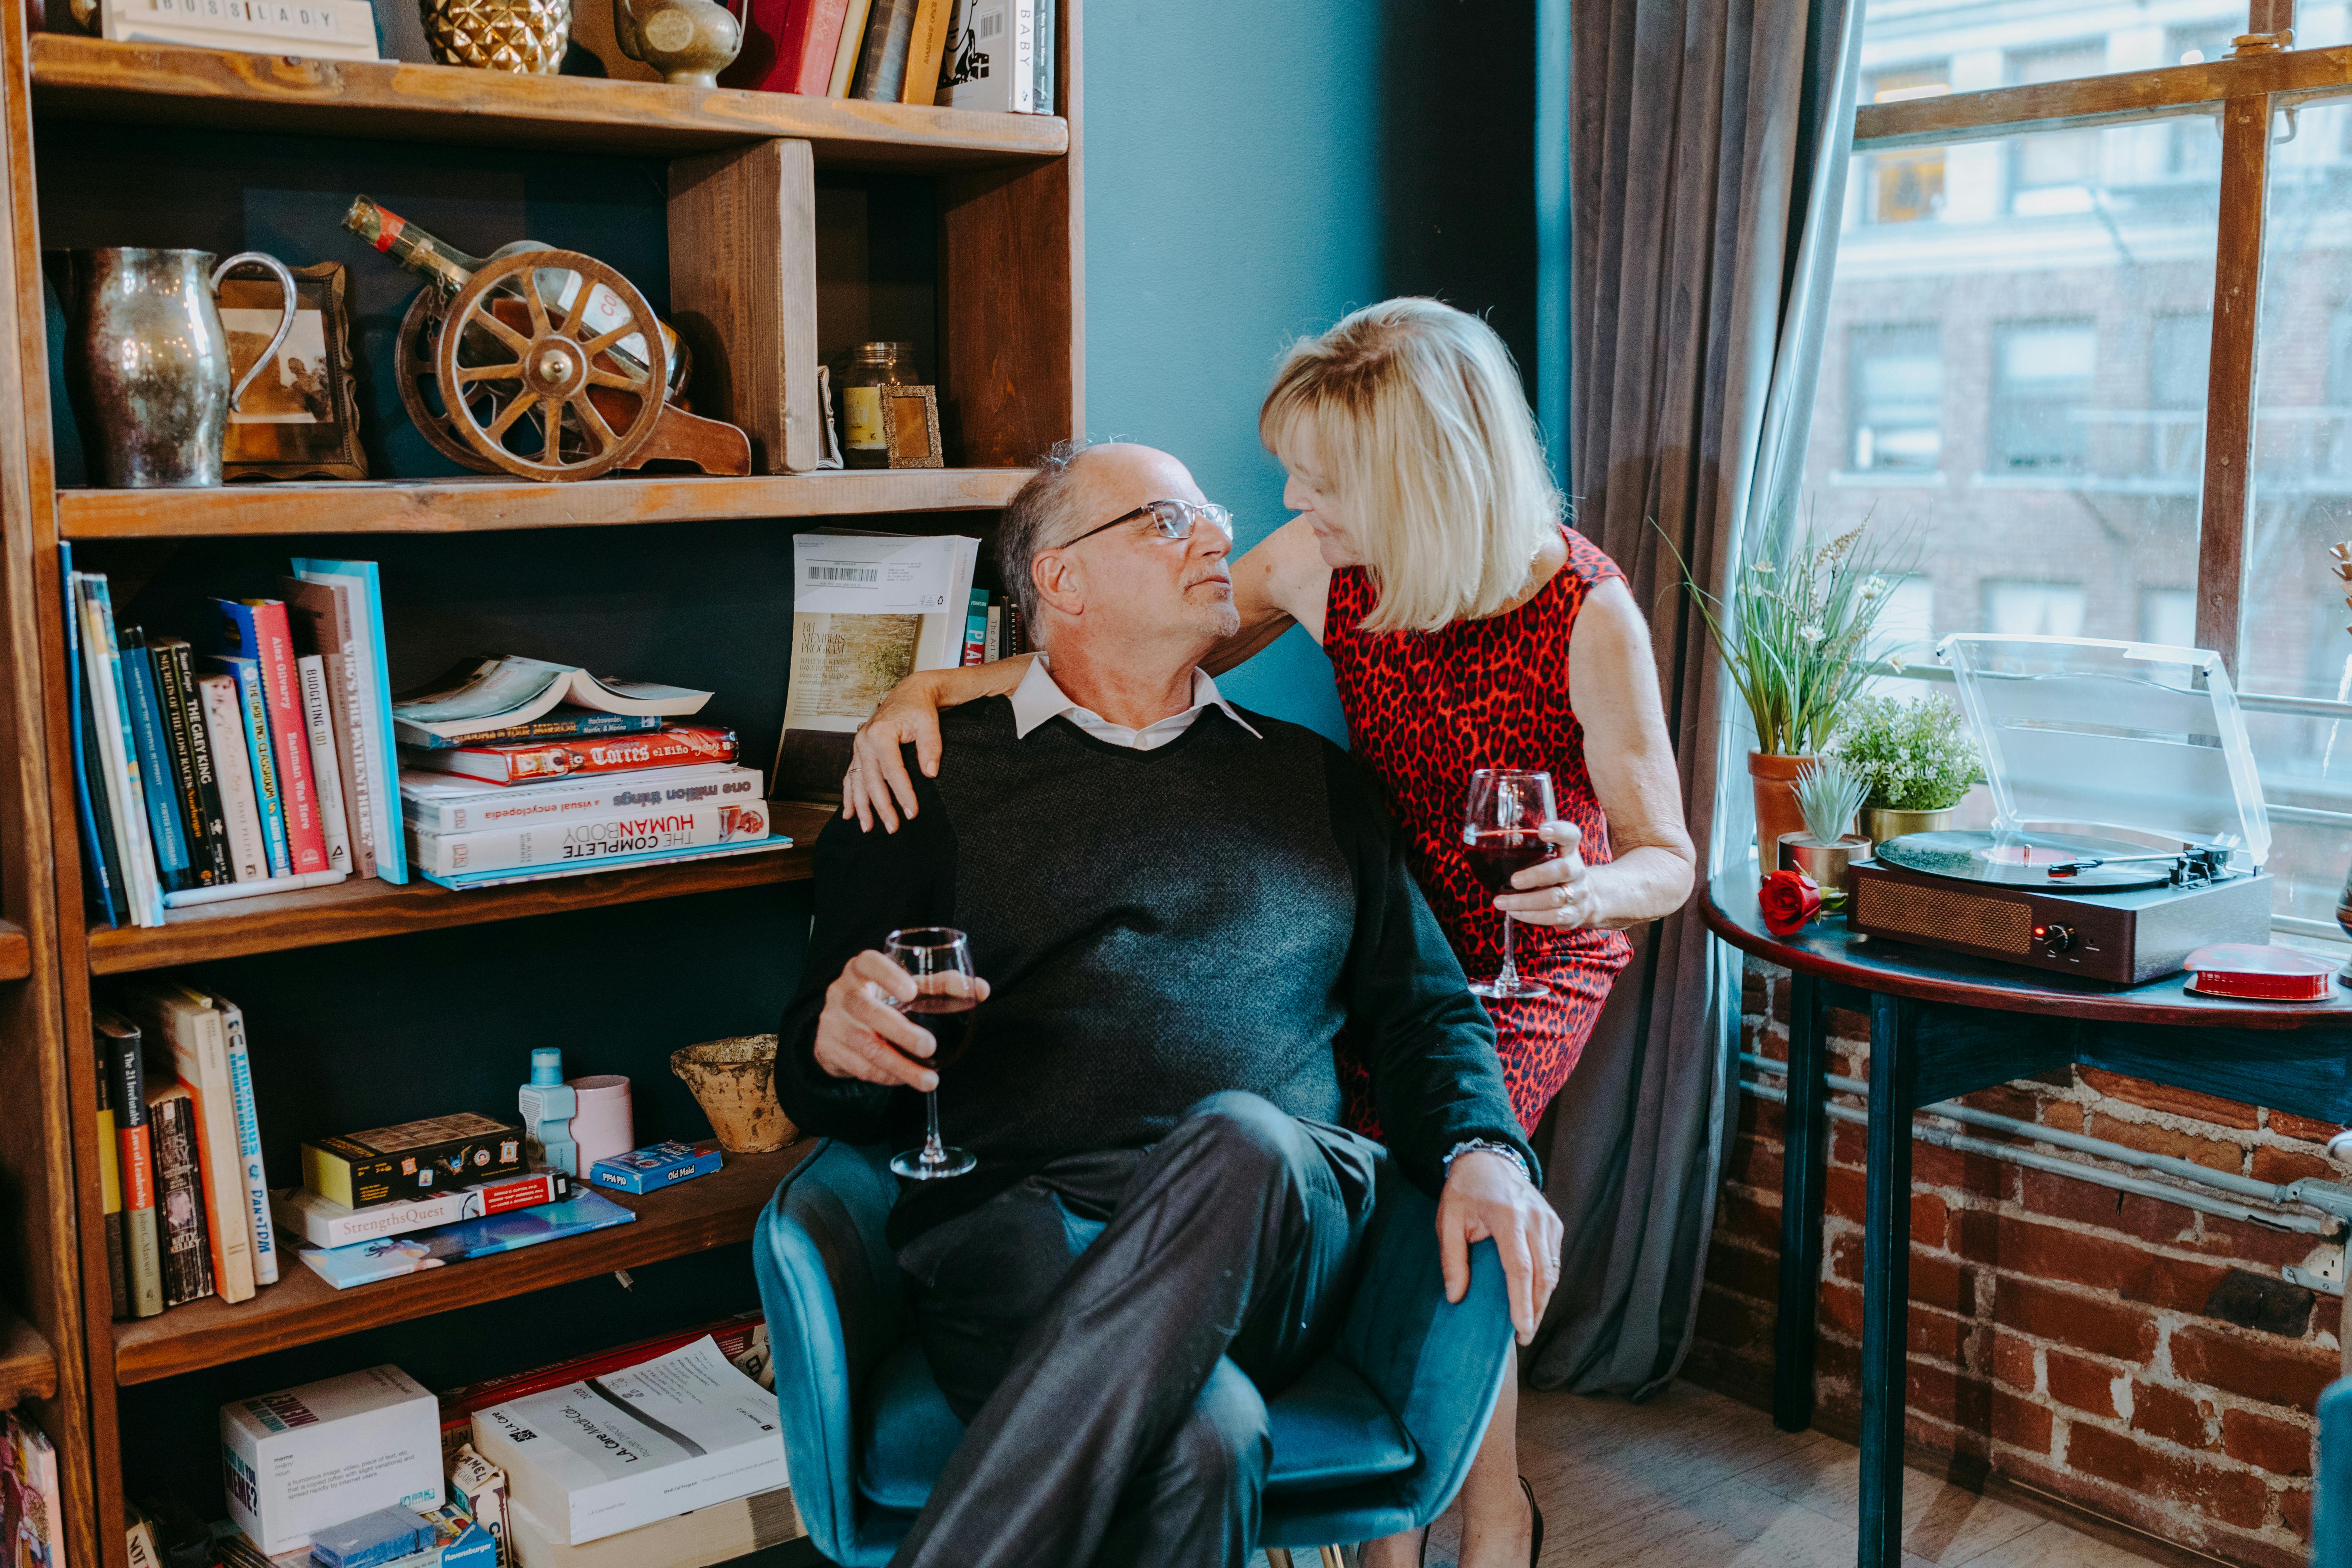 An elderly couple relaxing at home with wine | Source: Pexels